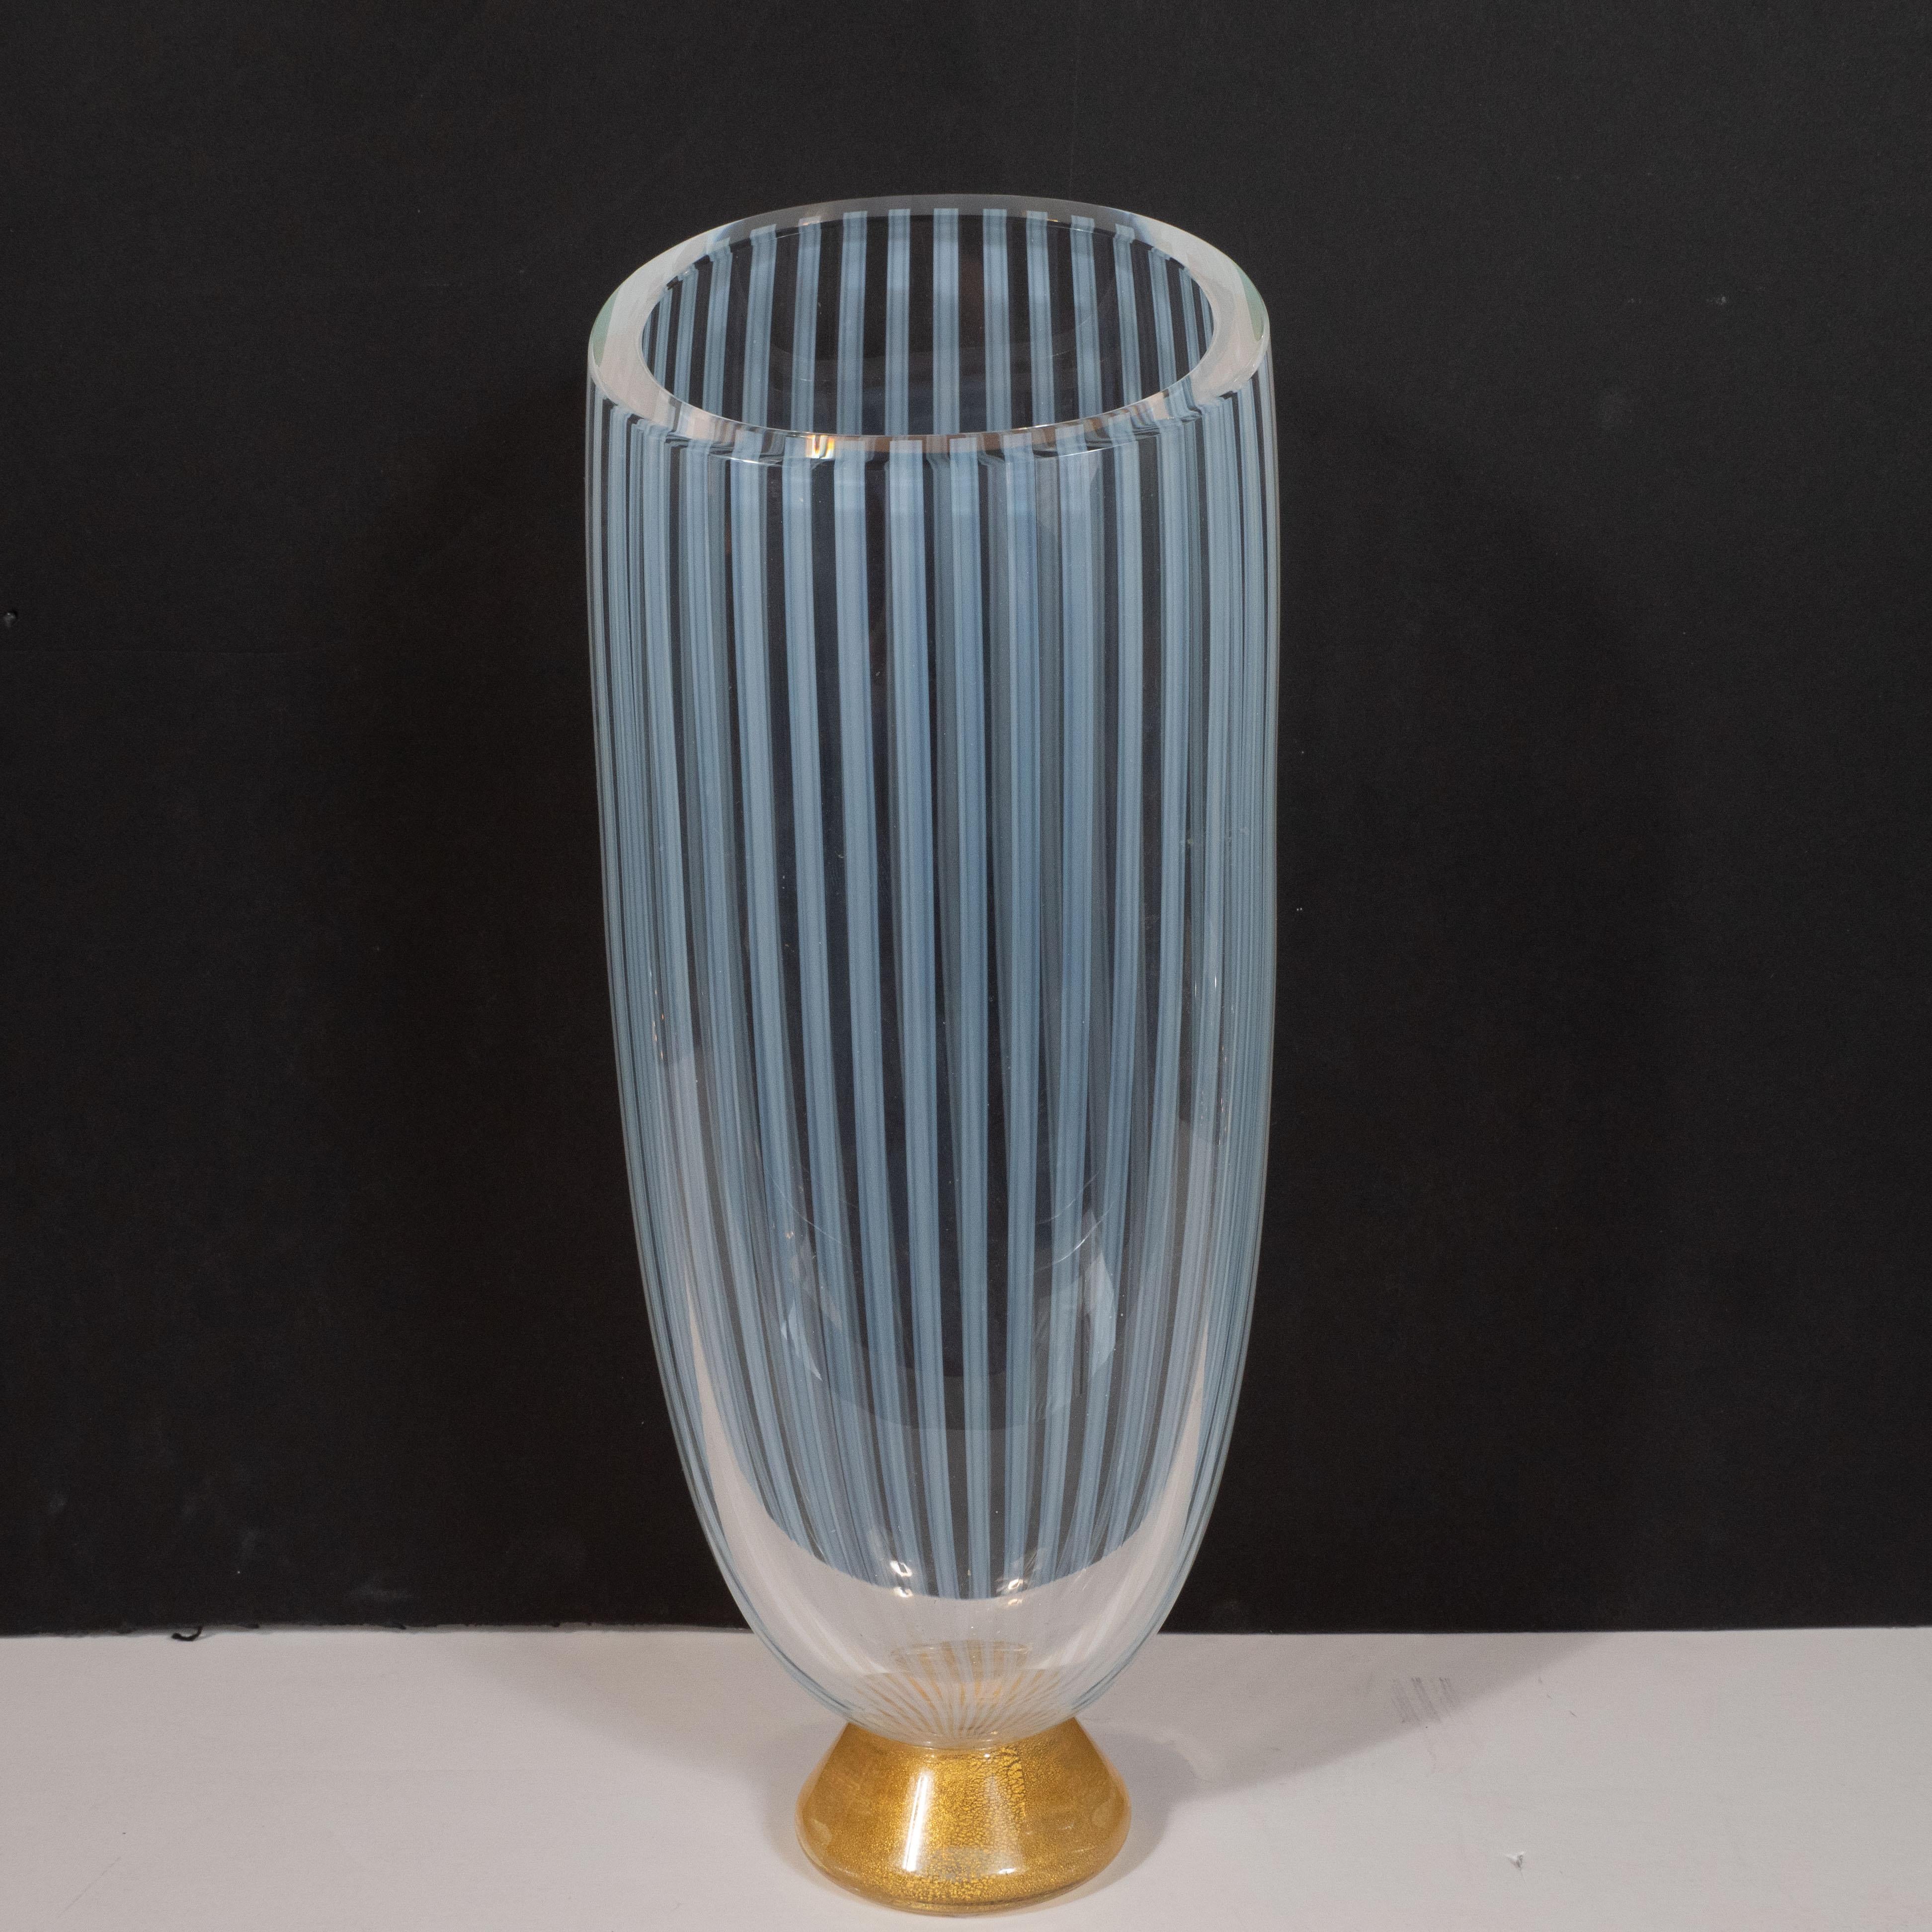 This stunning Mid-Century Modern vase was realized by Seguso- one of the most renowned glass ateliers of the period- in Murano, Italy, circa 1960. It features an hourglass form with a conical base replete with an abundance of 24-karat gold yellow